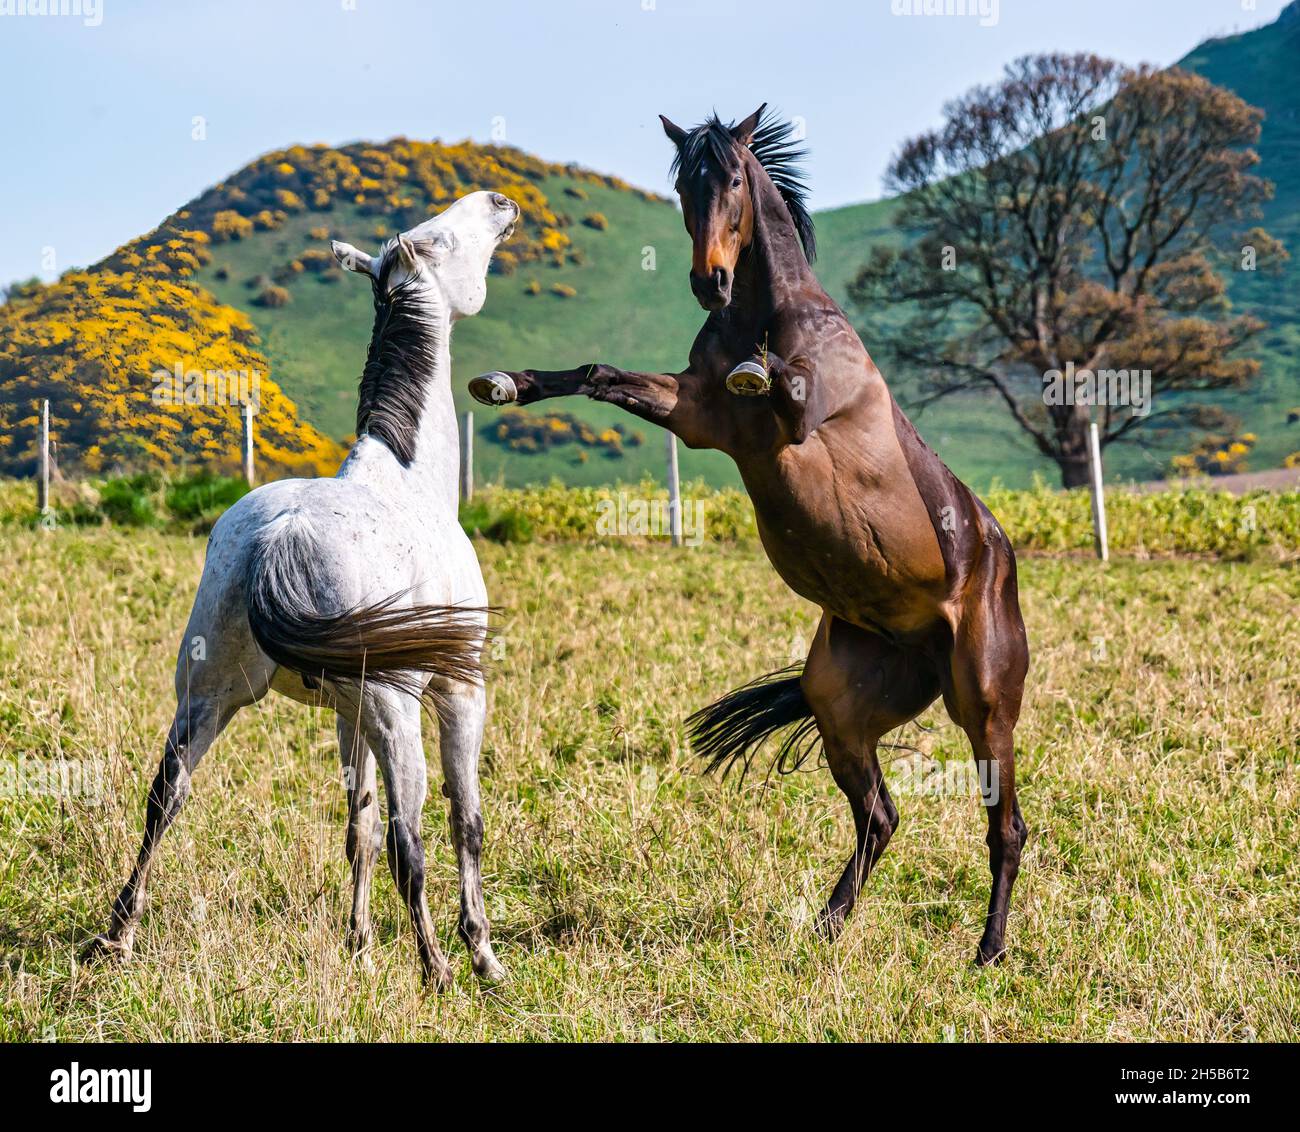 A pair of playful horses in a field in the Spring sunshine with one horse rearing up, East Lothian, Scotland, UK Stock Photo